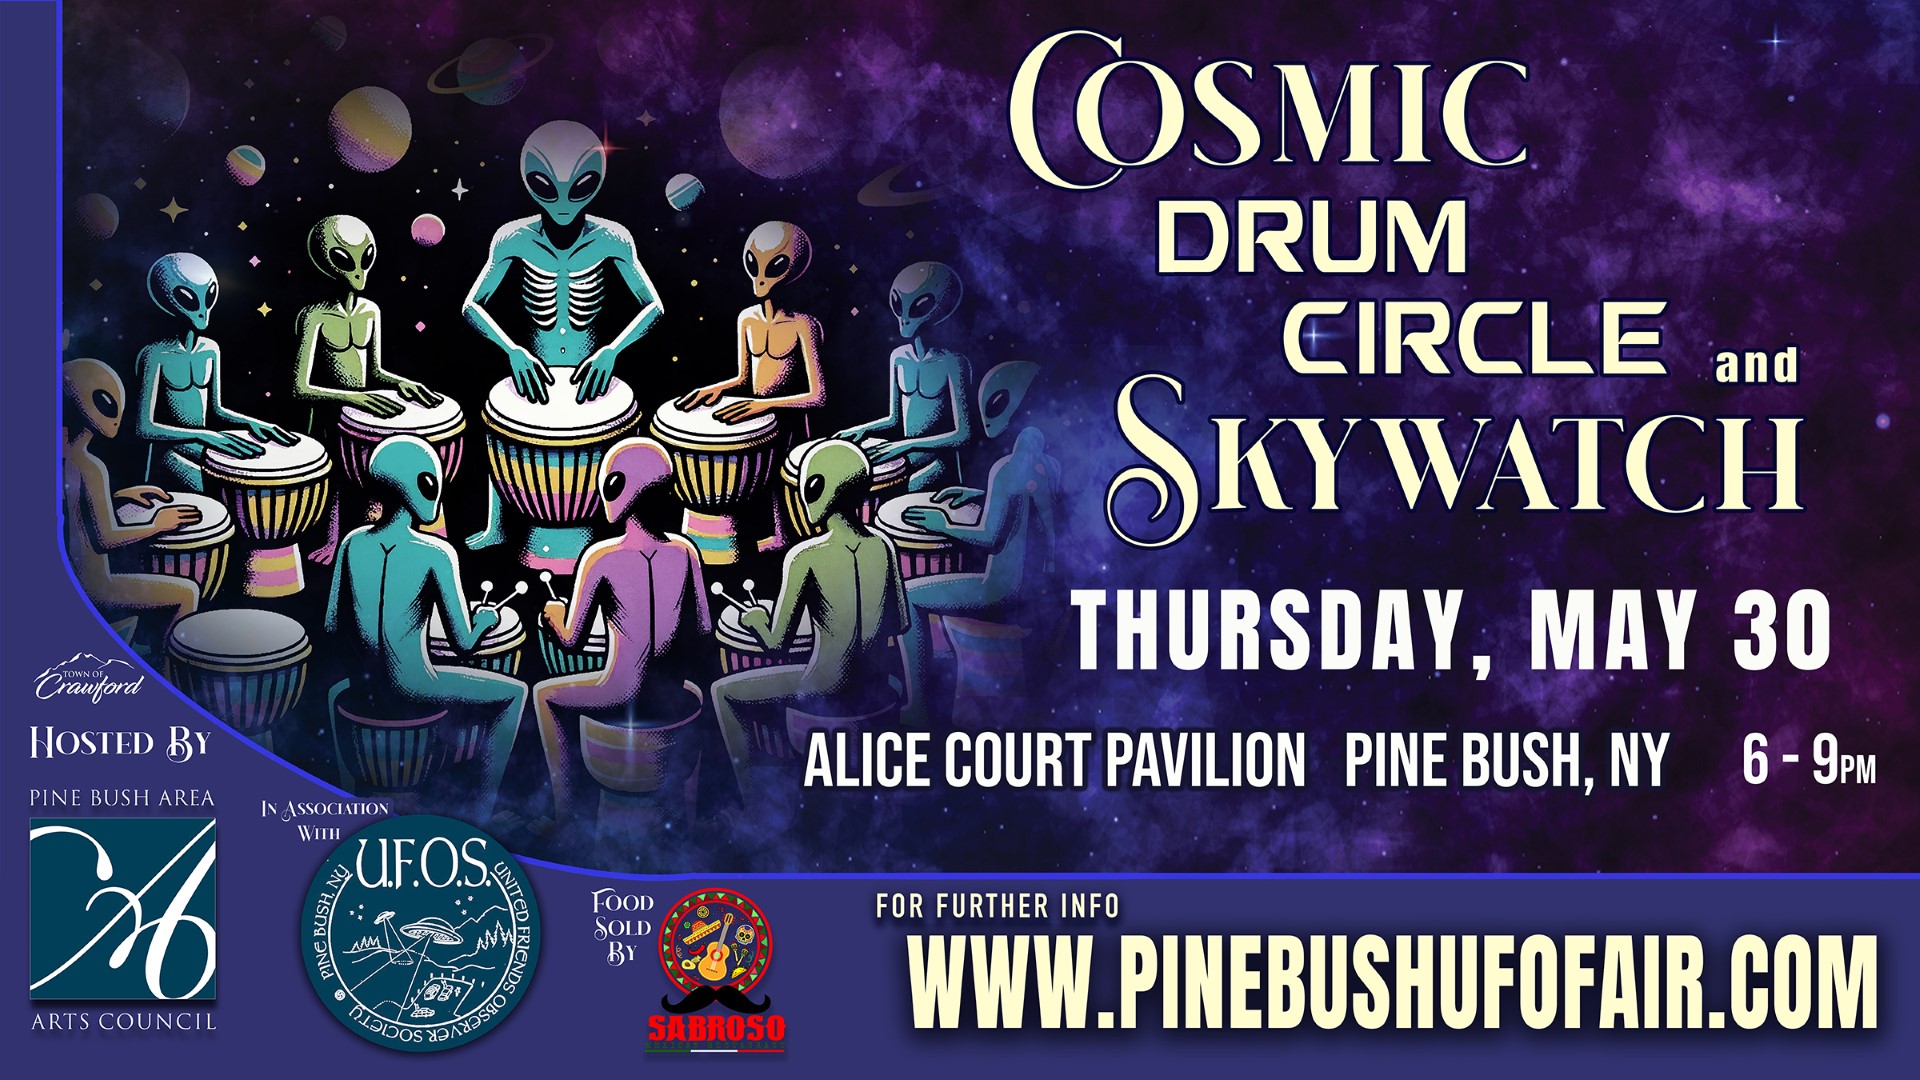 Cosmic Drum Circle and Skywatch